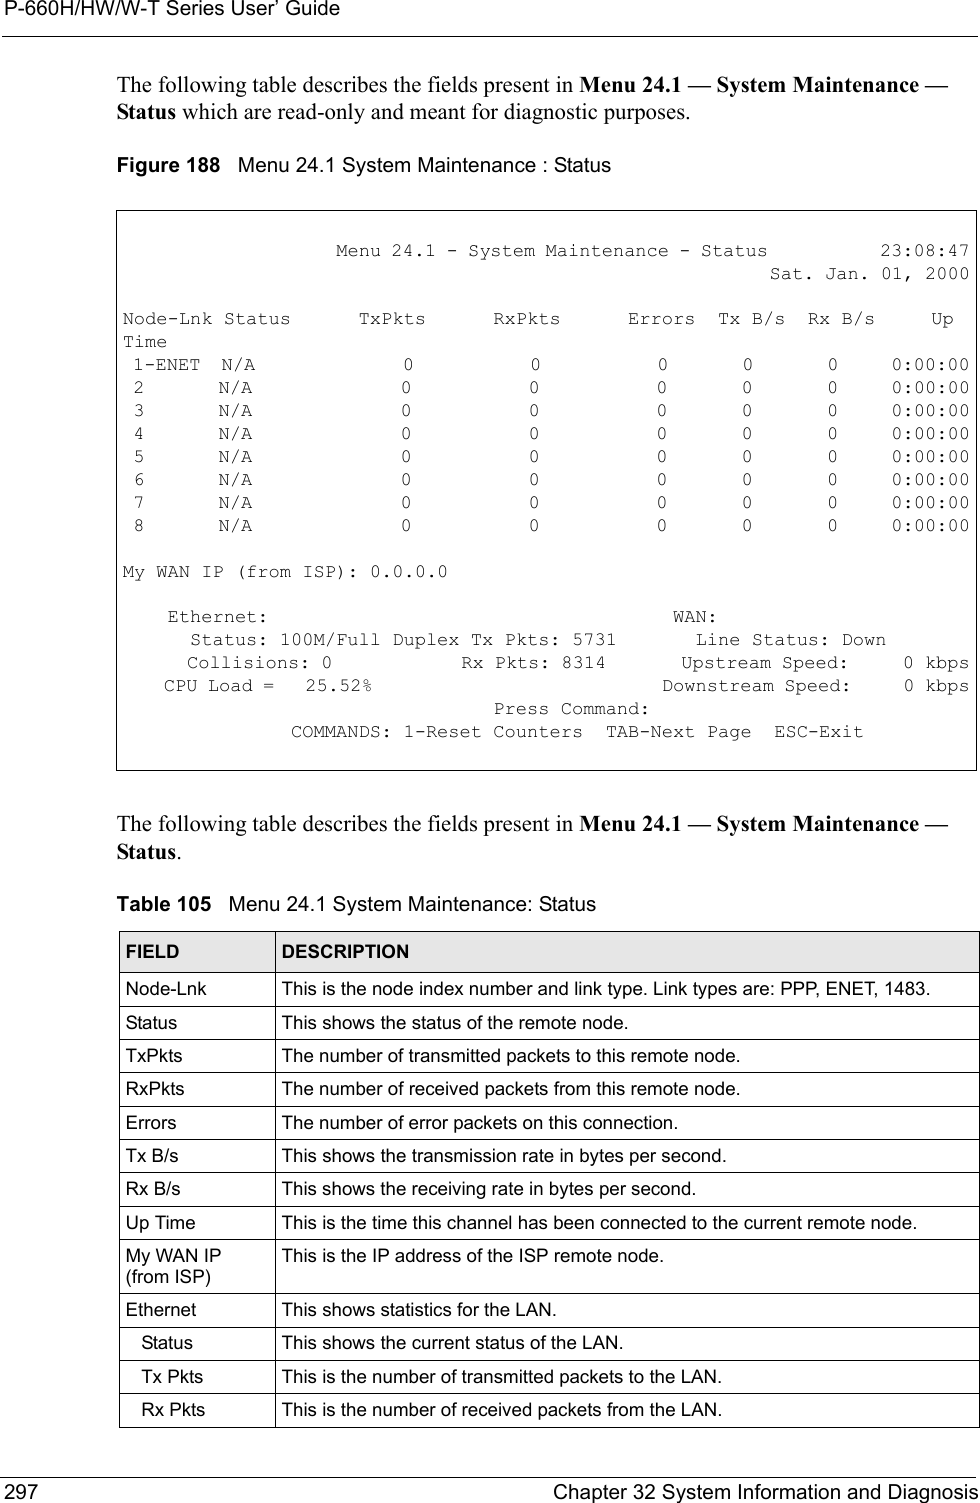 P-660H/HW/W-T Series User’ Guide297 Chapter 32 System Information and DiagnosisThe following table describes the fields present in Menu 24.1 — System Maintenance — Status which are read-only and meant for diagnostic purposes.Figure 188   Menu 24.1 System Maintenance : StatusThe following table describes the fields present in Menu 24.1 — System Maintenance — Status.                     Menu 24.1 - System Maintenance - Status           23:08:47                                                             Sat. Jan. 01, 2000Node-Lnk Status      TxPkts      RxPkts      Errors  Tx B/s  Rx B/s     Up Time 1-ENET  N/A              0           0           0       0       0     0:00:00 2       N/A              0           0           0       0       0     0:00:00 3       N/A              0           0           0       0       0     0:00:00 4       N/A              0           0           0       0       0     0:00:00 5       N/A              0           0           0       0       0     0:00:00 6       N/A              0           0           0       0       0     0:00:00 7       N/A              0           0           0       0       0     0:00:00 8       N/A              0           0           0       0       0     0:00:00My WAN IP (from ISP): 0.0.0.0    Ethernet:                                    WAN:      Status: 100M/Full Duplex Tx Pkts: 5731       Line Status: Down      Collisions: 0            Rx Pkts: 8314       Upstream Speed:     0 kbps    CPU Load =   25.52%                            Downstream Speed:     0 kbps                                 Press Command:               COMMANDS: 1-Reset Counters  TAB-Next Page  ESC-ExitTable 105   Menu 24.1 System Maintenance: StatusFIELD DESCRIPTIONNode-Lnk This is the node index number and link type. Link types are: PPP, ENET, 1483.Status This shows the status of the remote node.TxPkts The number of transmitted packets to this remote node.RxPkts The number of received packets from this remote node.Errors The number of error packets on this connection.Tx B/s This shows the transmission rate in bytes per second.Rx B/s This shows the receiving rate in bytes per second.Up Time This is the time this channel has been connected to the current remote node.My WAN IP (from ISP)This is the IP address of the ISP remote node.Ethernet This shows statistics for the LAN.   Status This shows the current status of the LAN.   Tx Pkts This is the number of transmitted packets to the LAN.   Rx Pkts This is the number of received packets from the LAN.